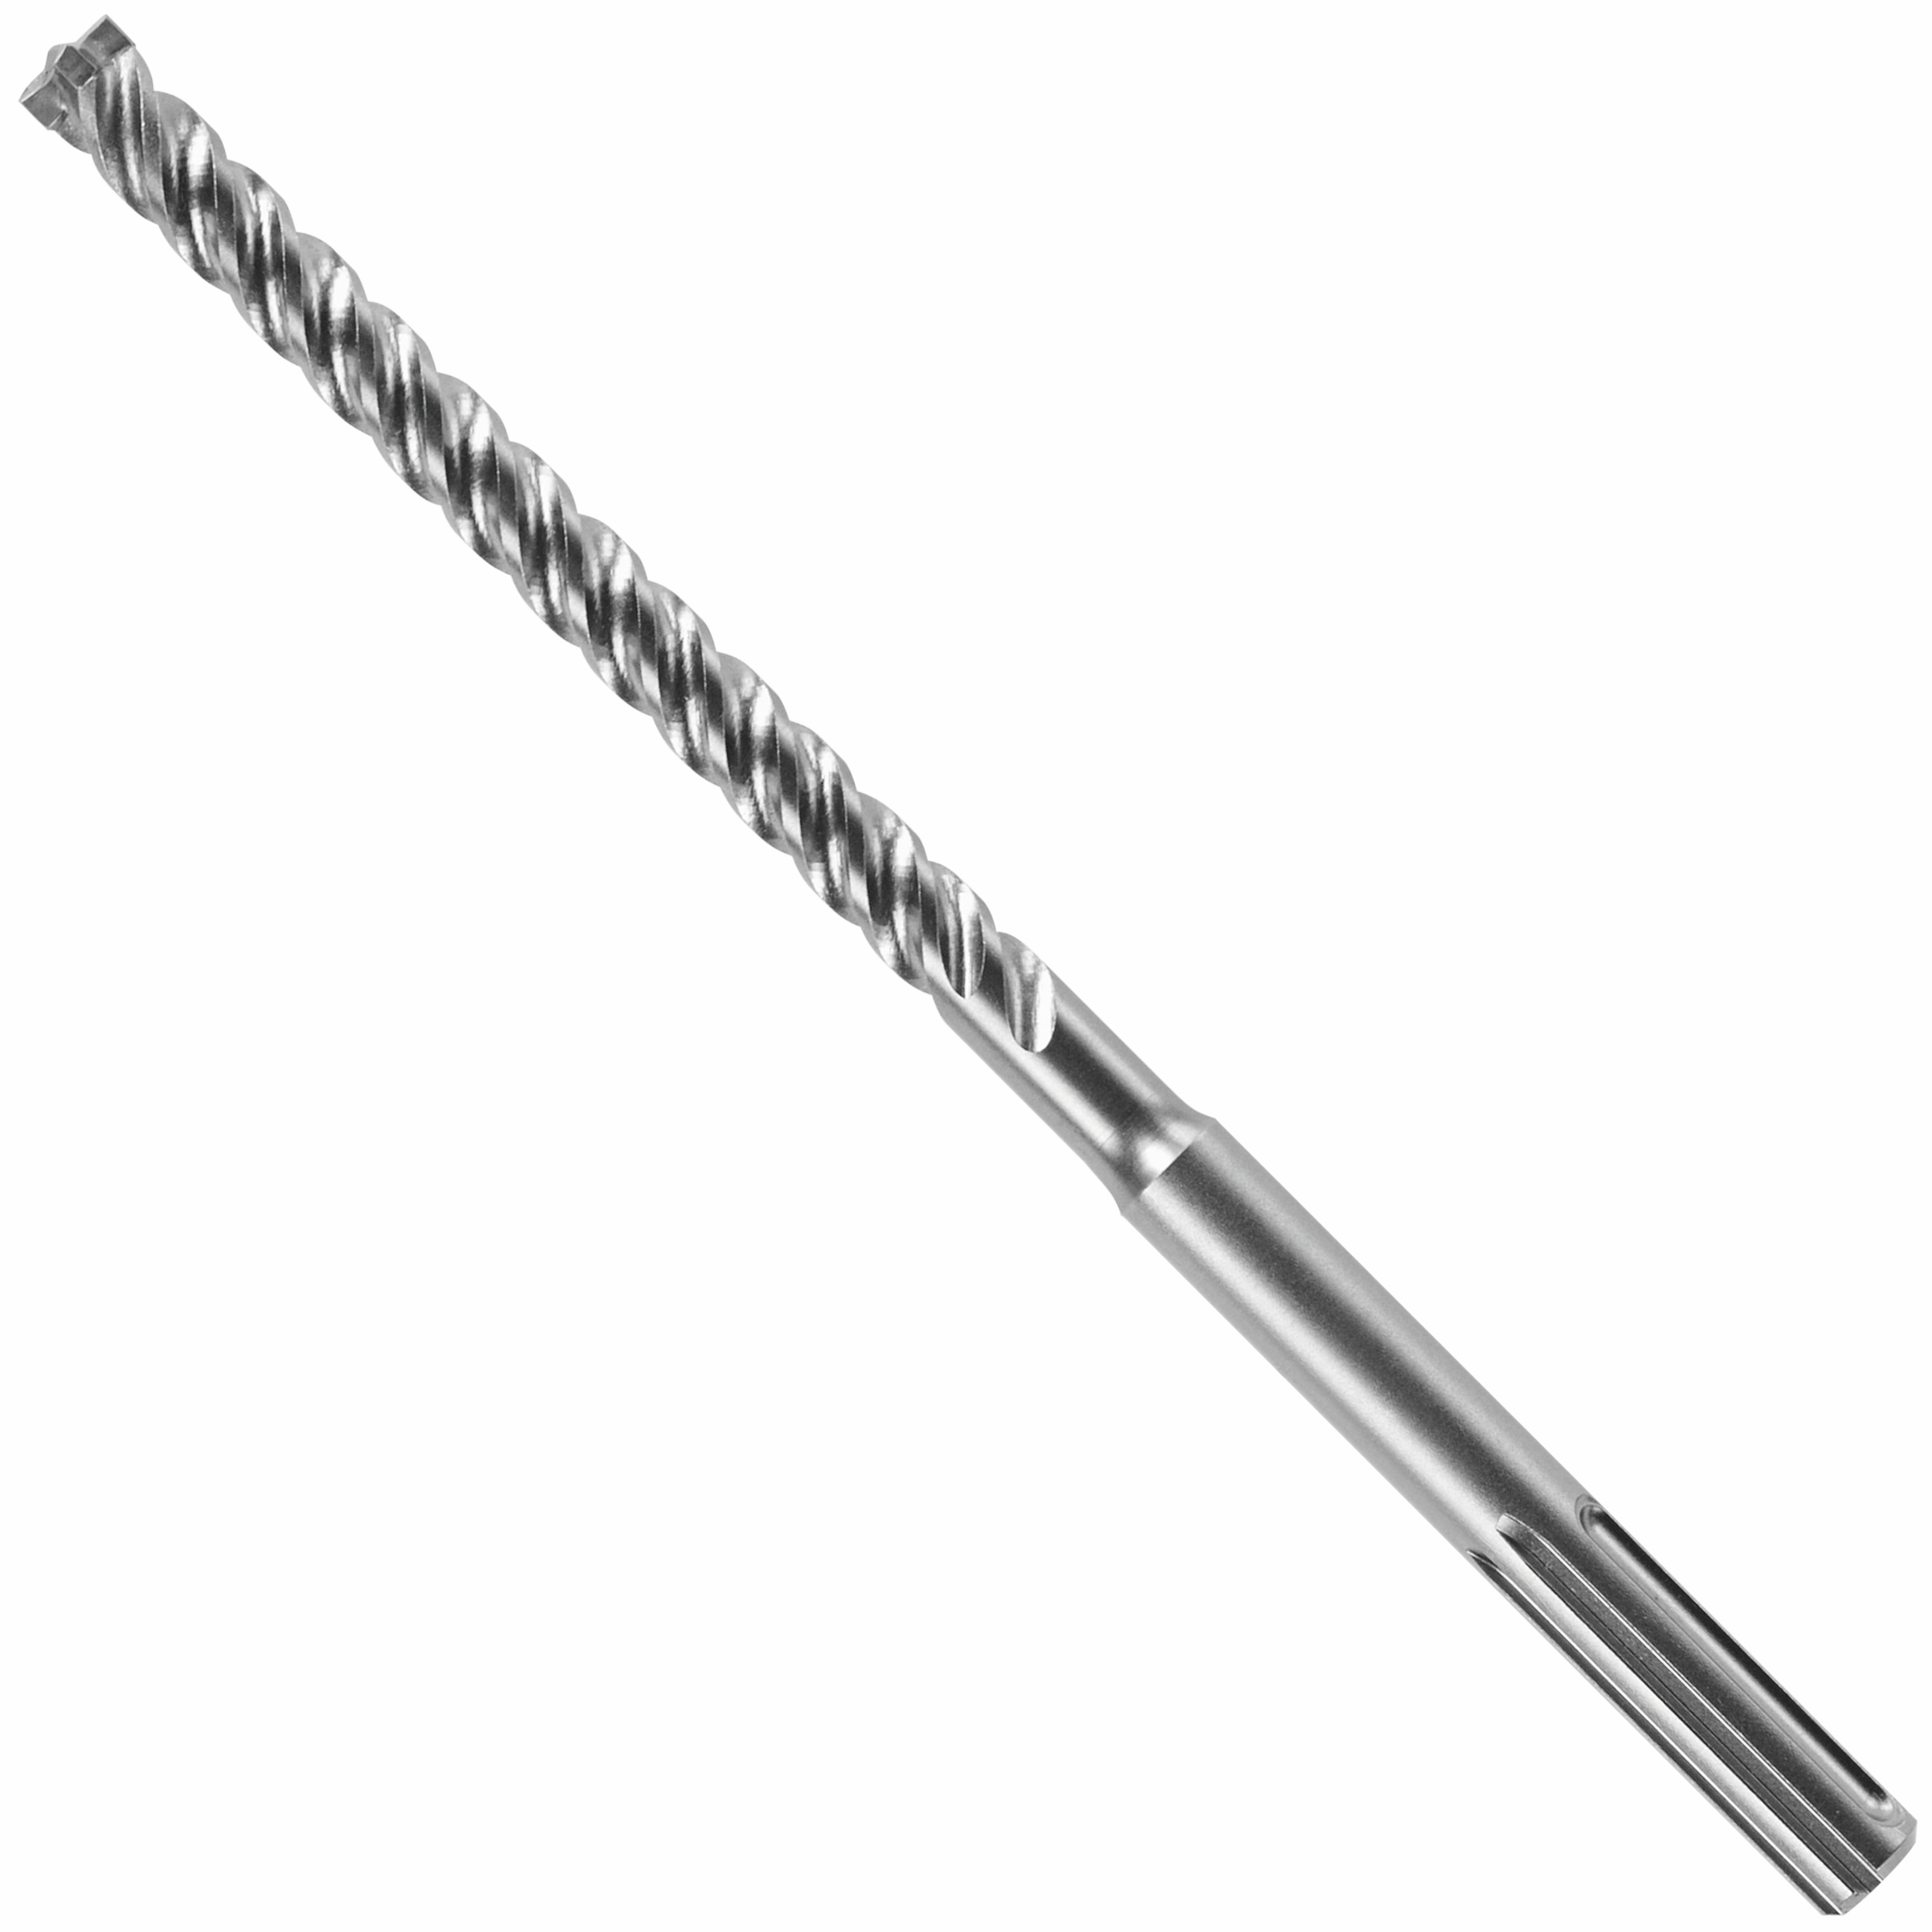 Driltech AB-068-068 A-Taper Rotary Hammer Drill Bit, 5/8 x 12 Overall  Length